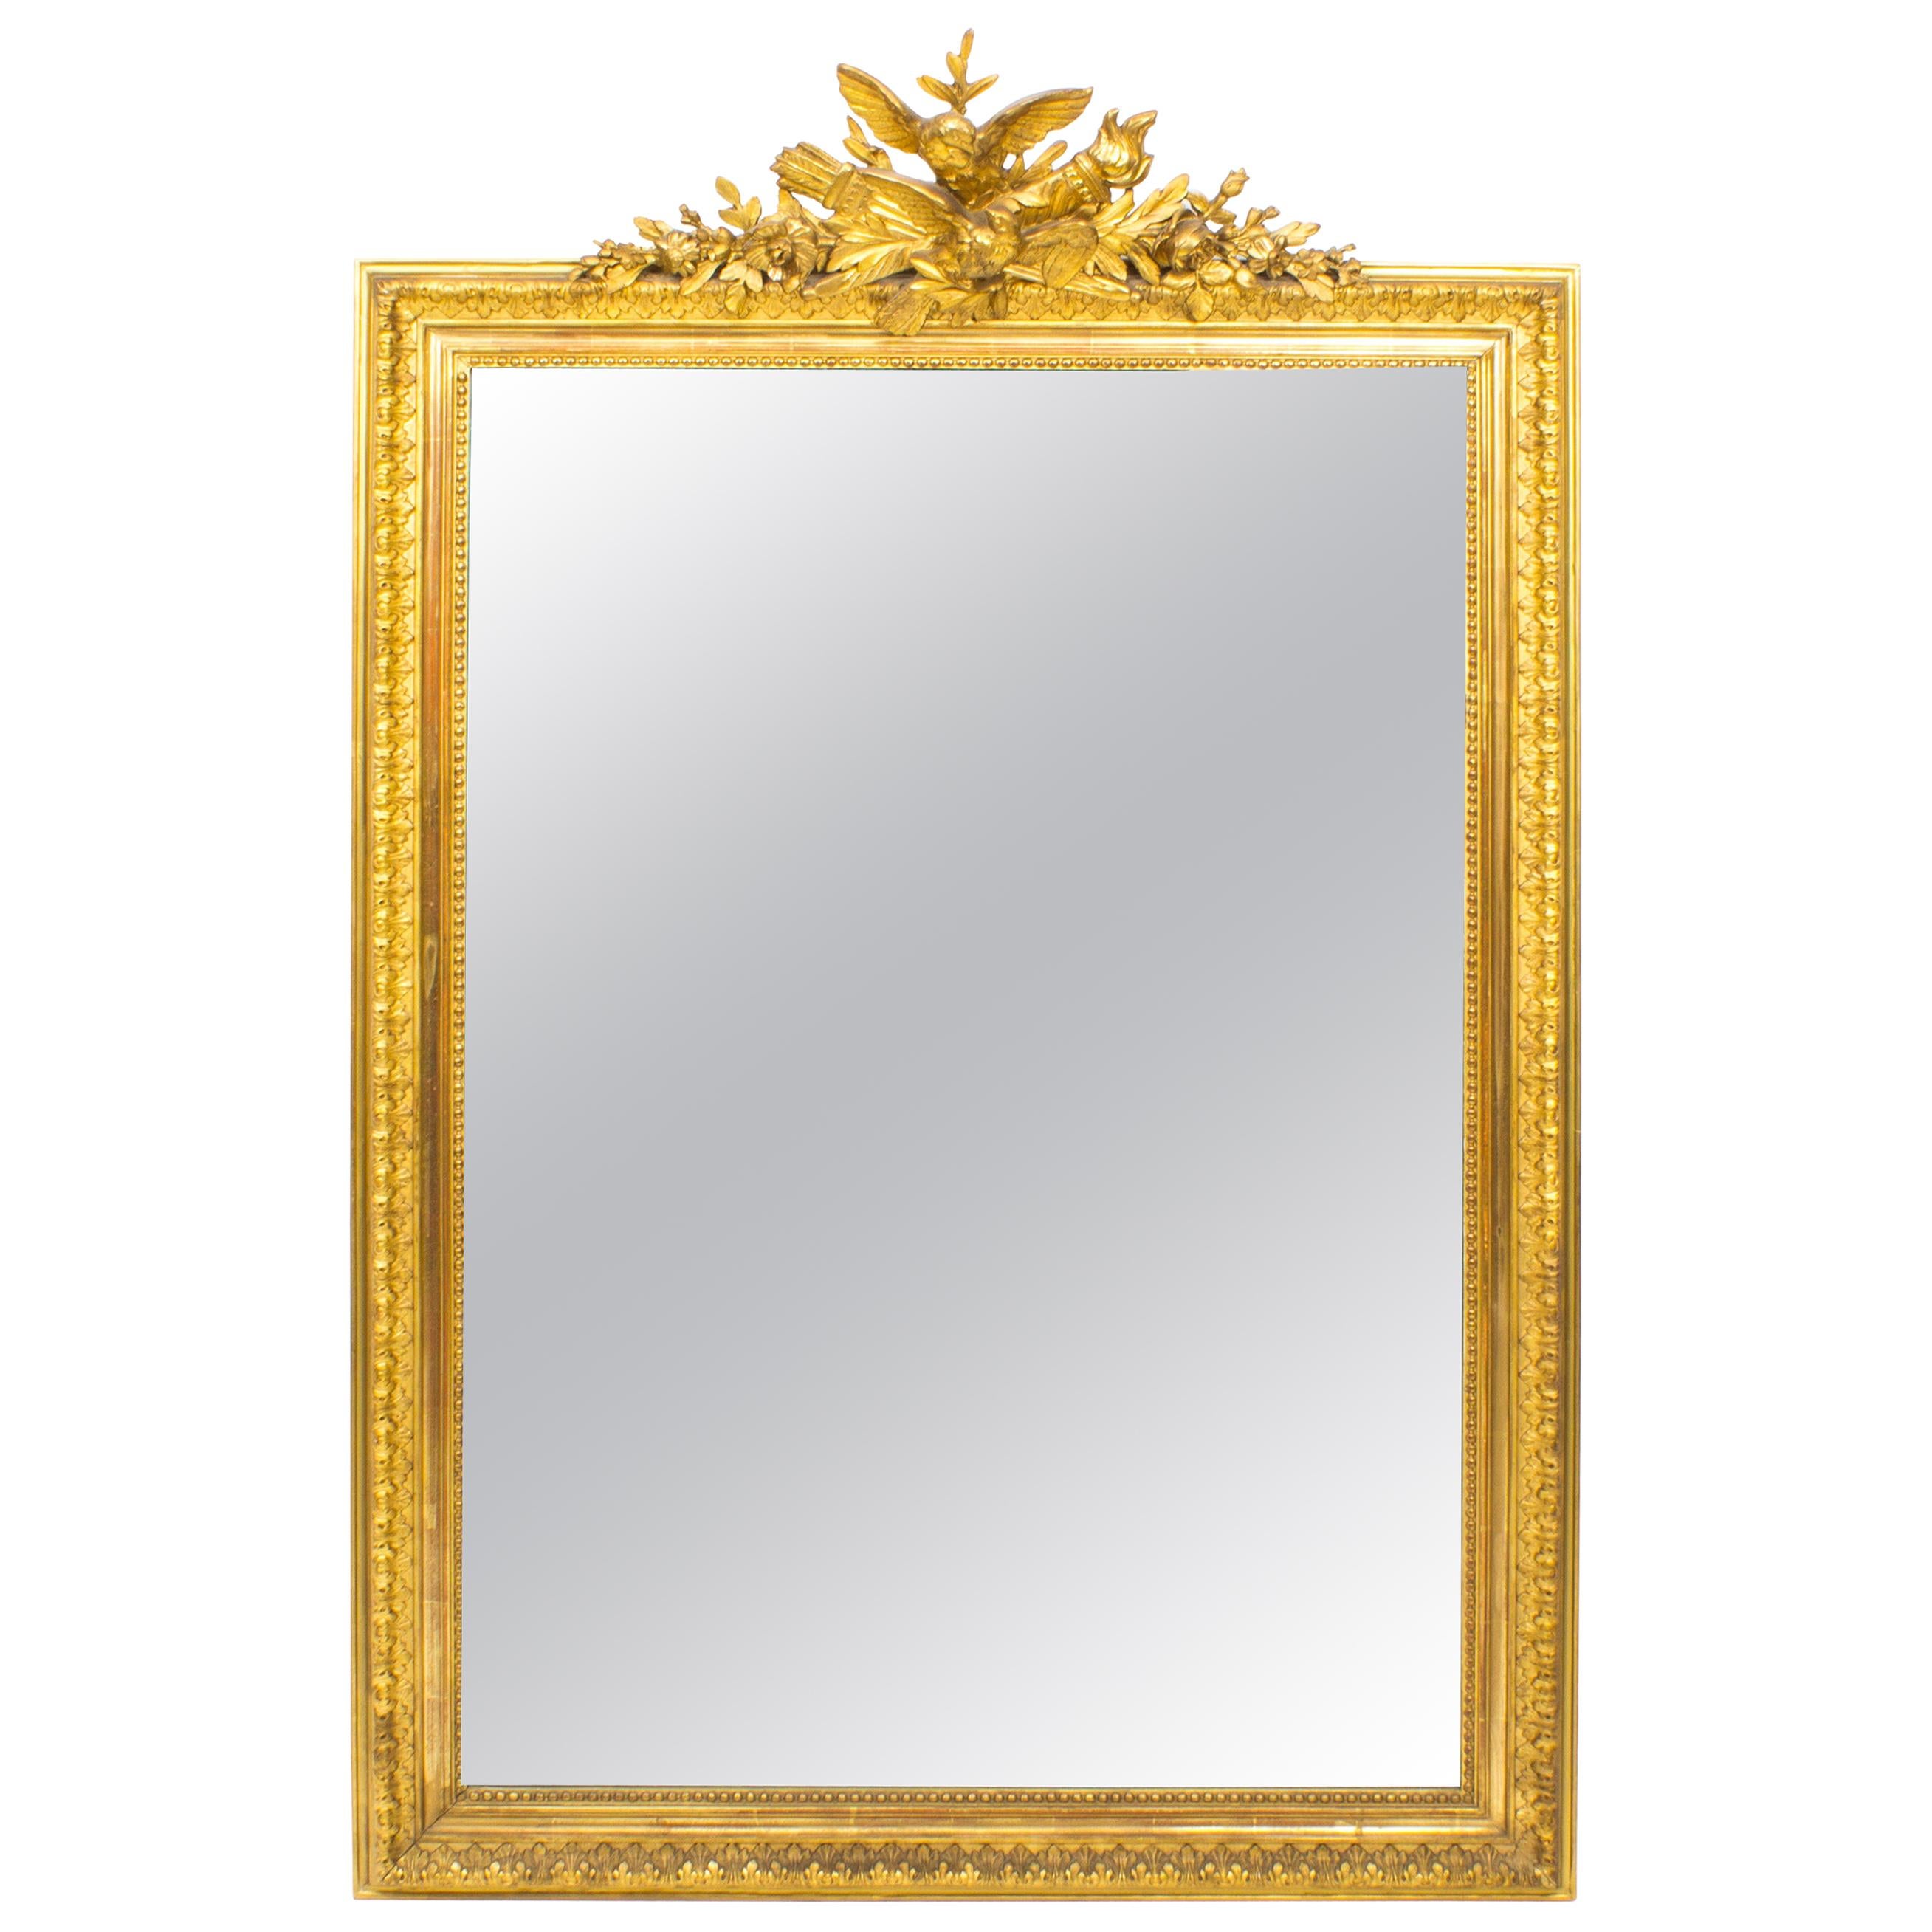 Antique French Giltwood Overmantel Mirror, 19th Century